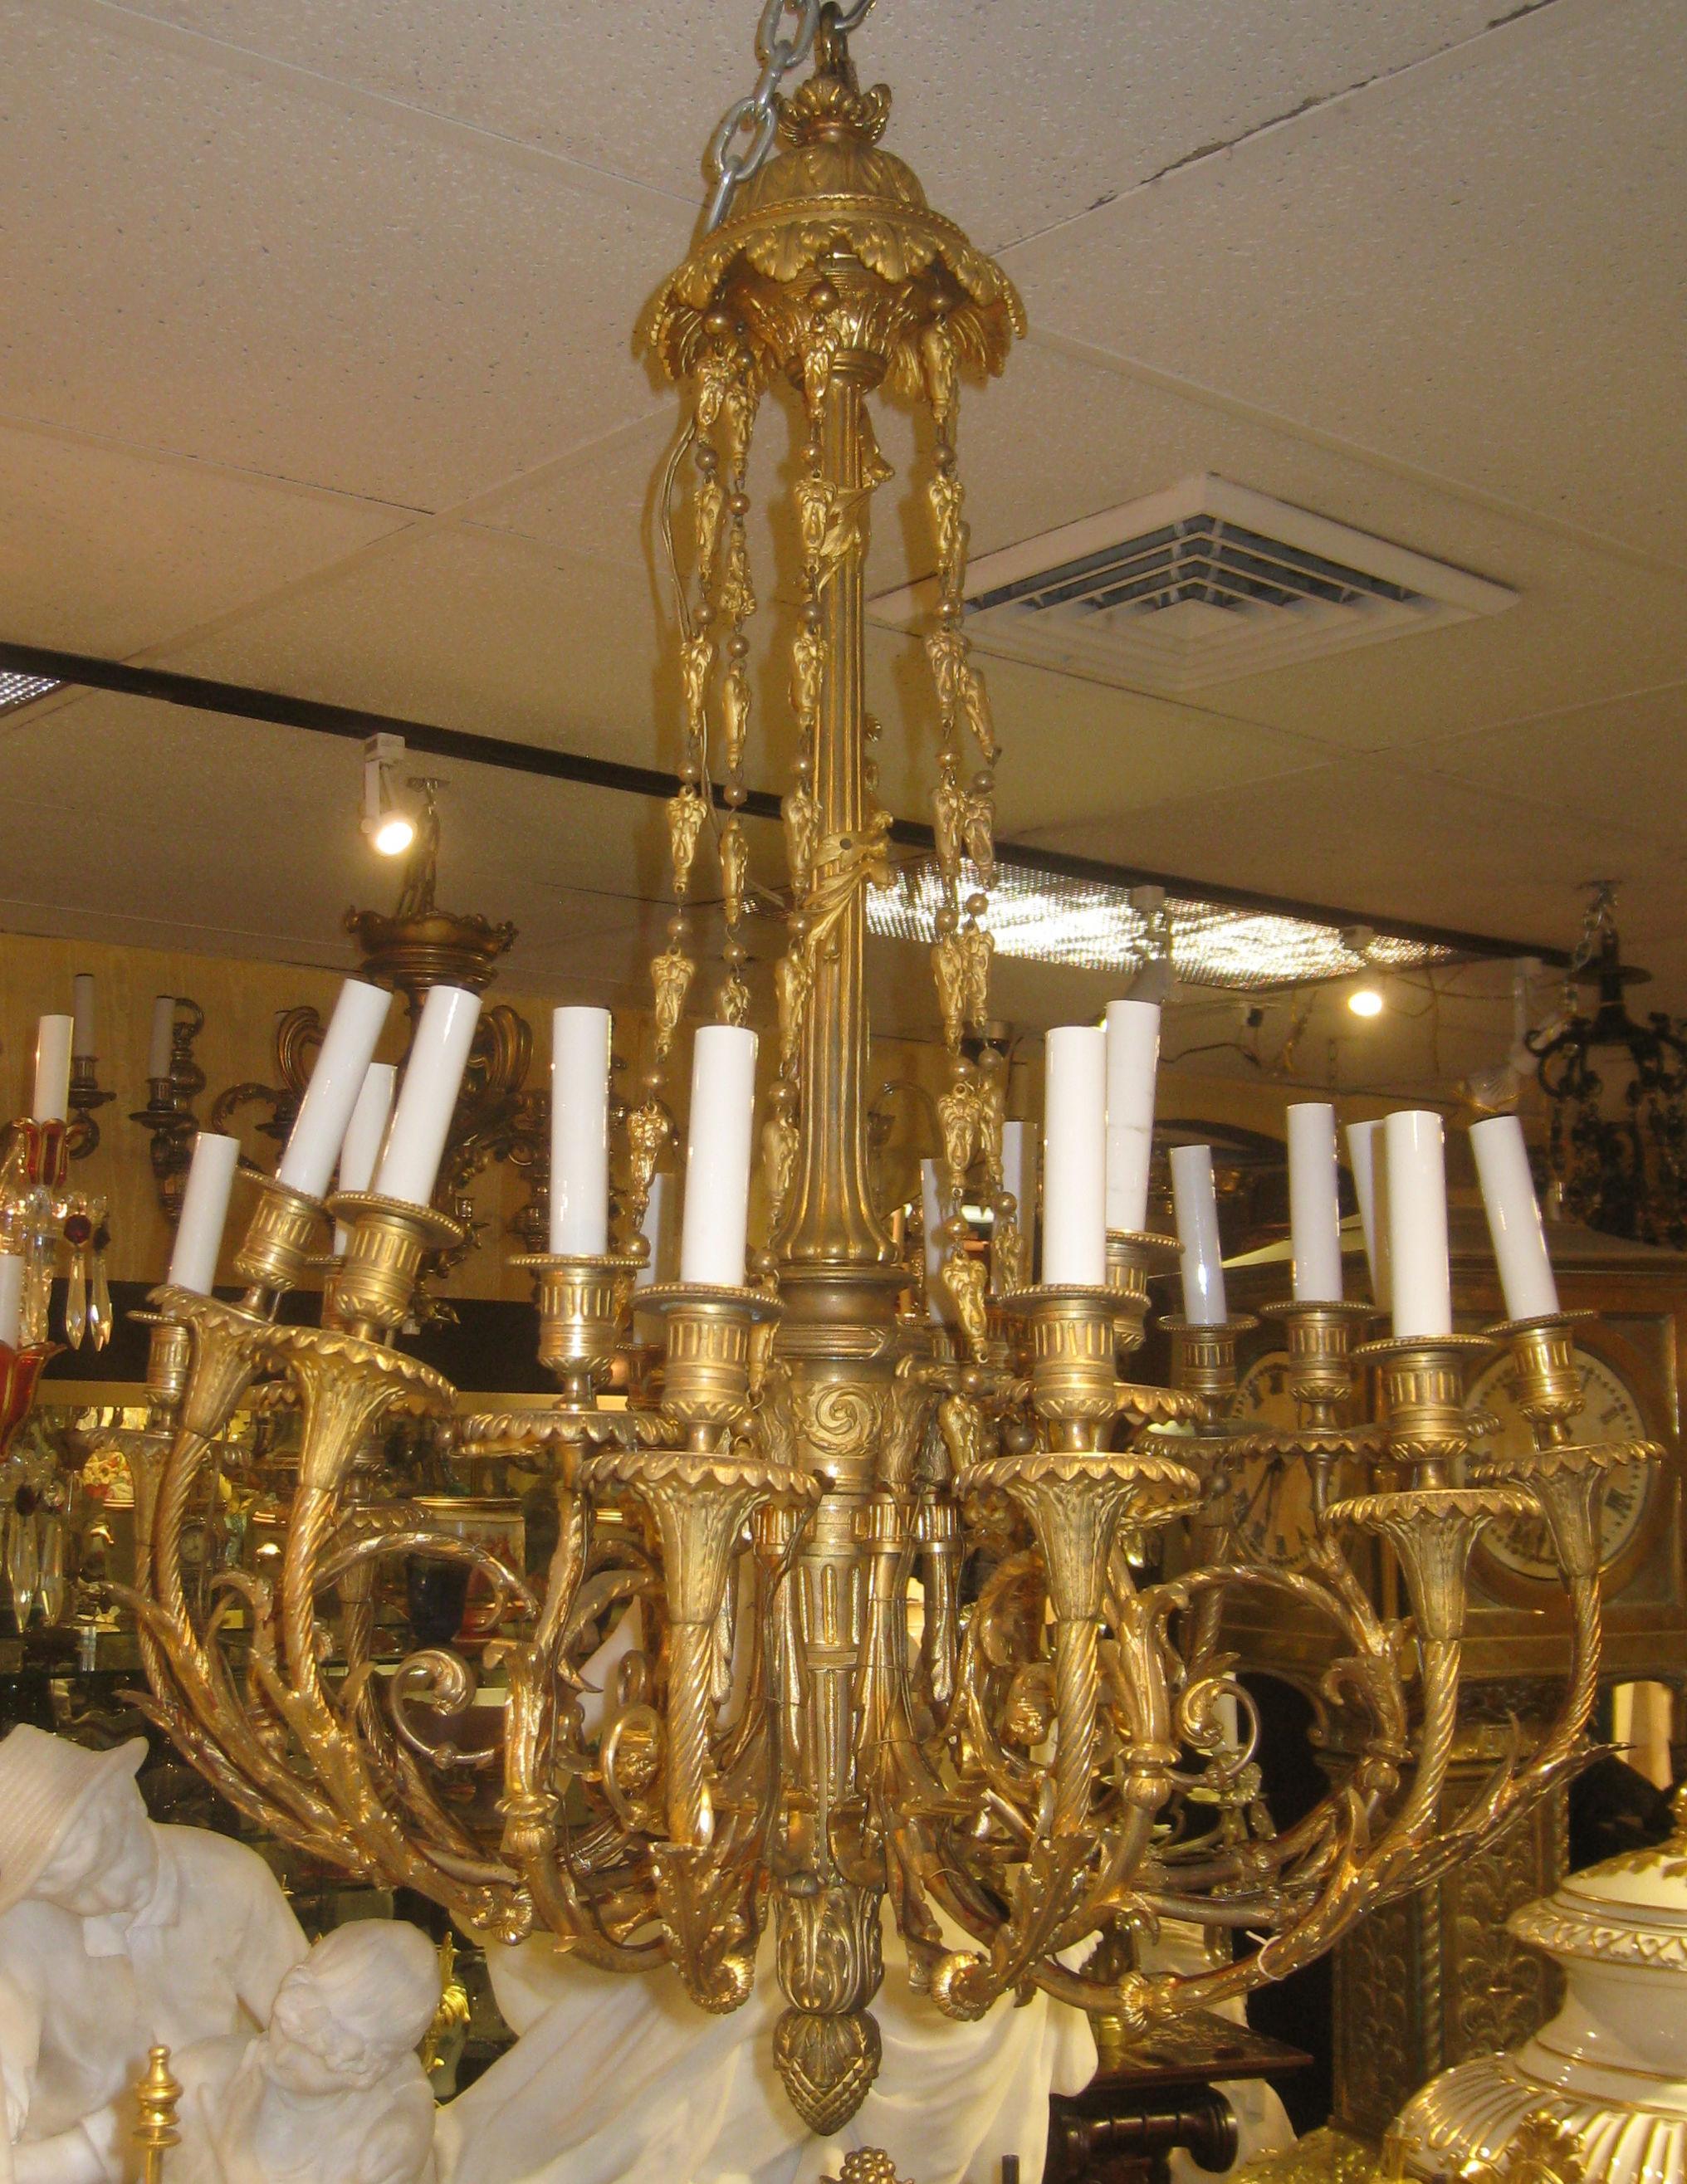 French 19th Century 18-Light Gilt Bronze Chandelier in Louis XVI Style For Sale 3